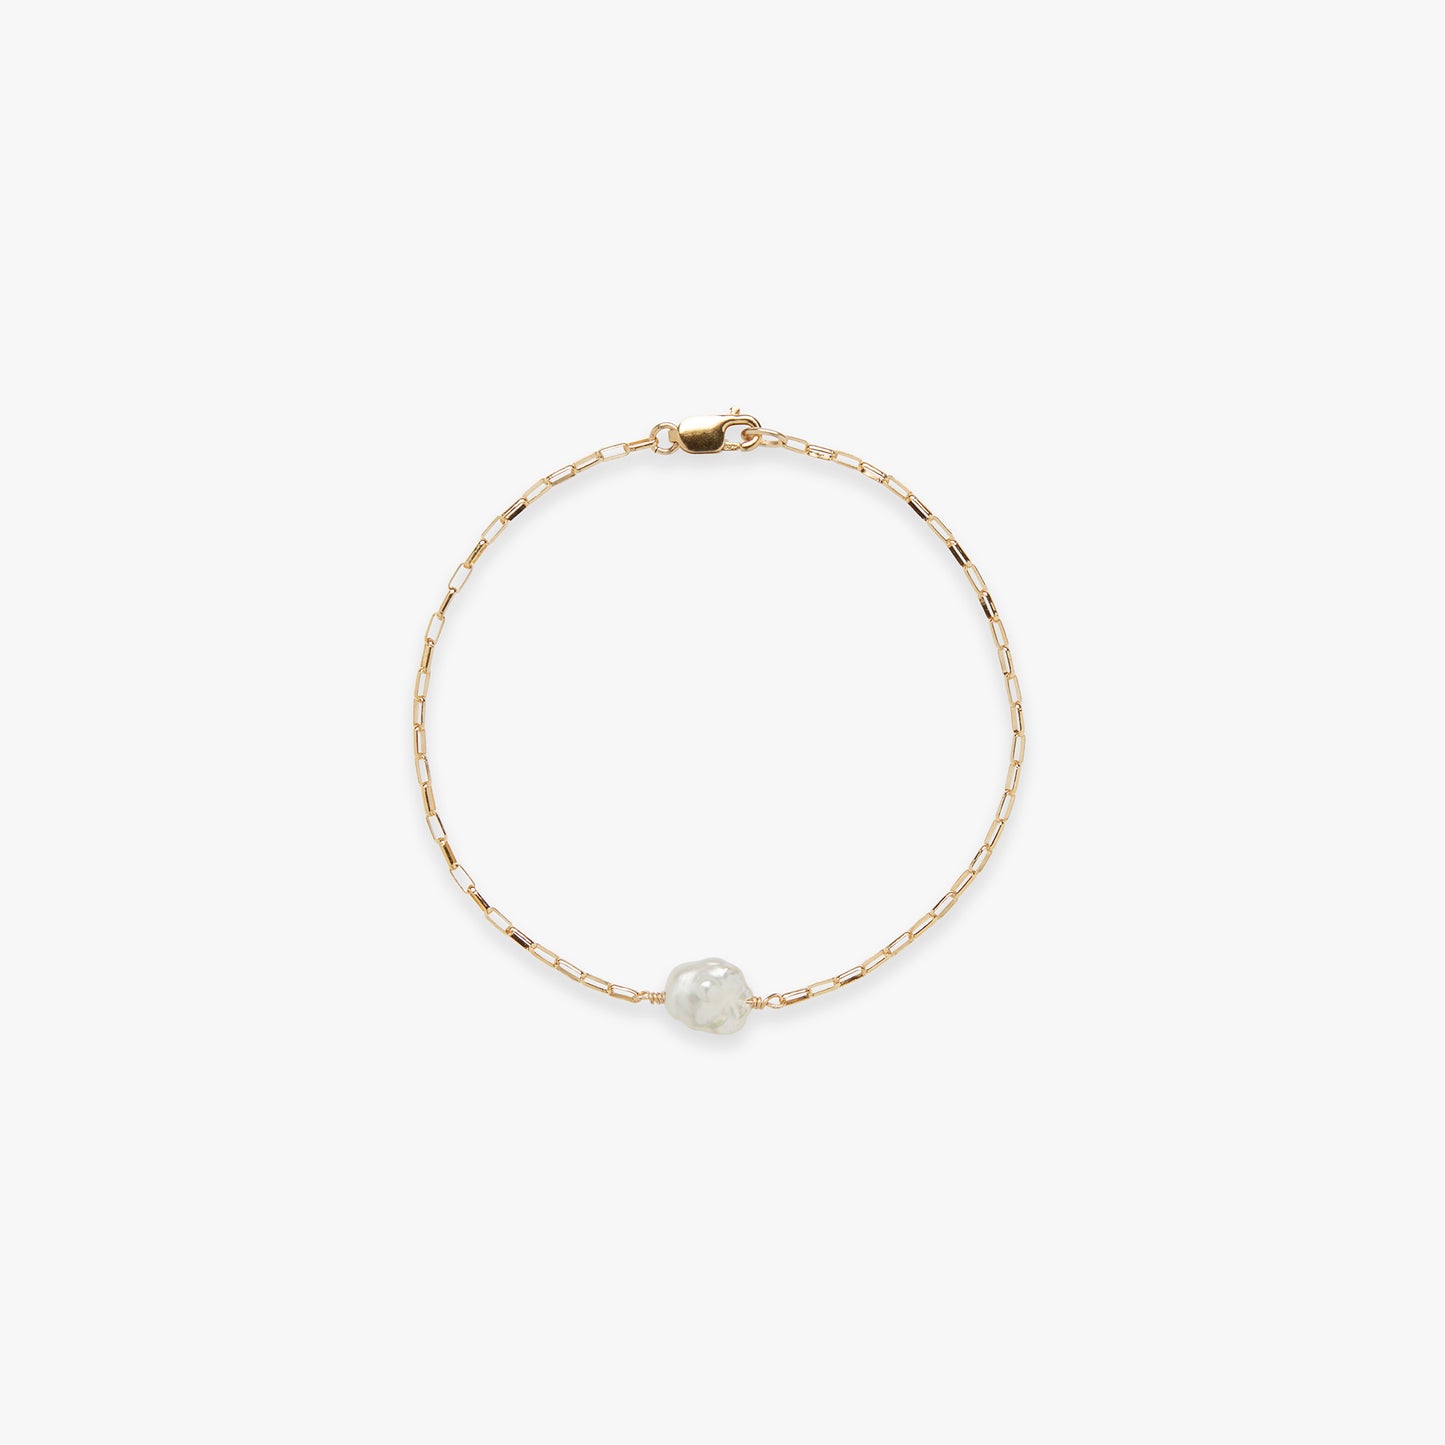 Laad afbeelding in Galerijviewer, Havercappu armband gold filled
